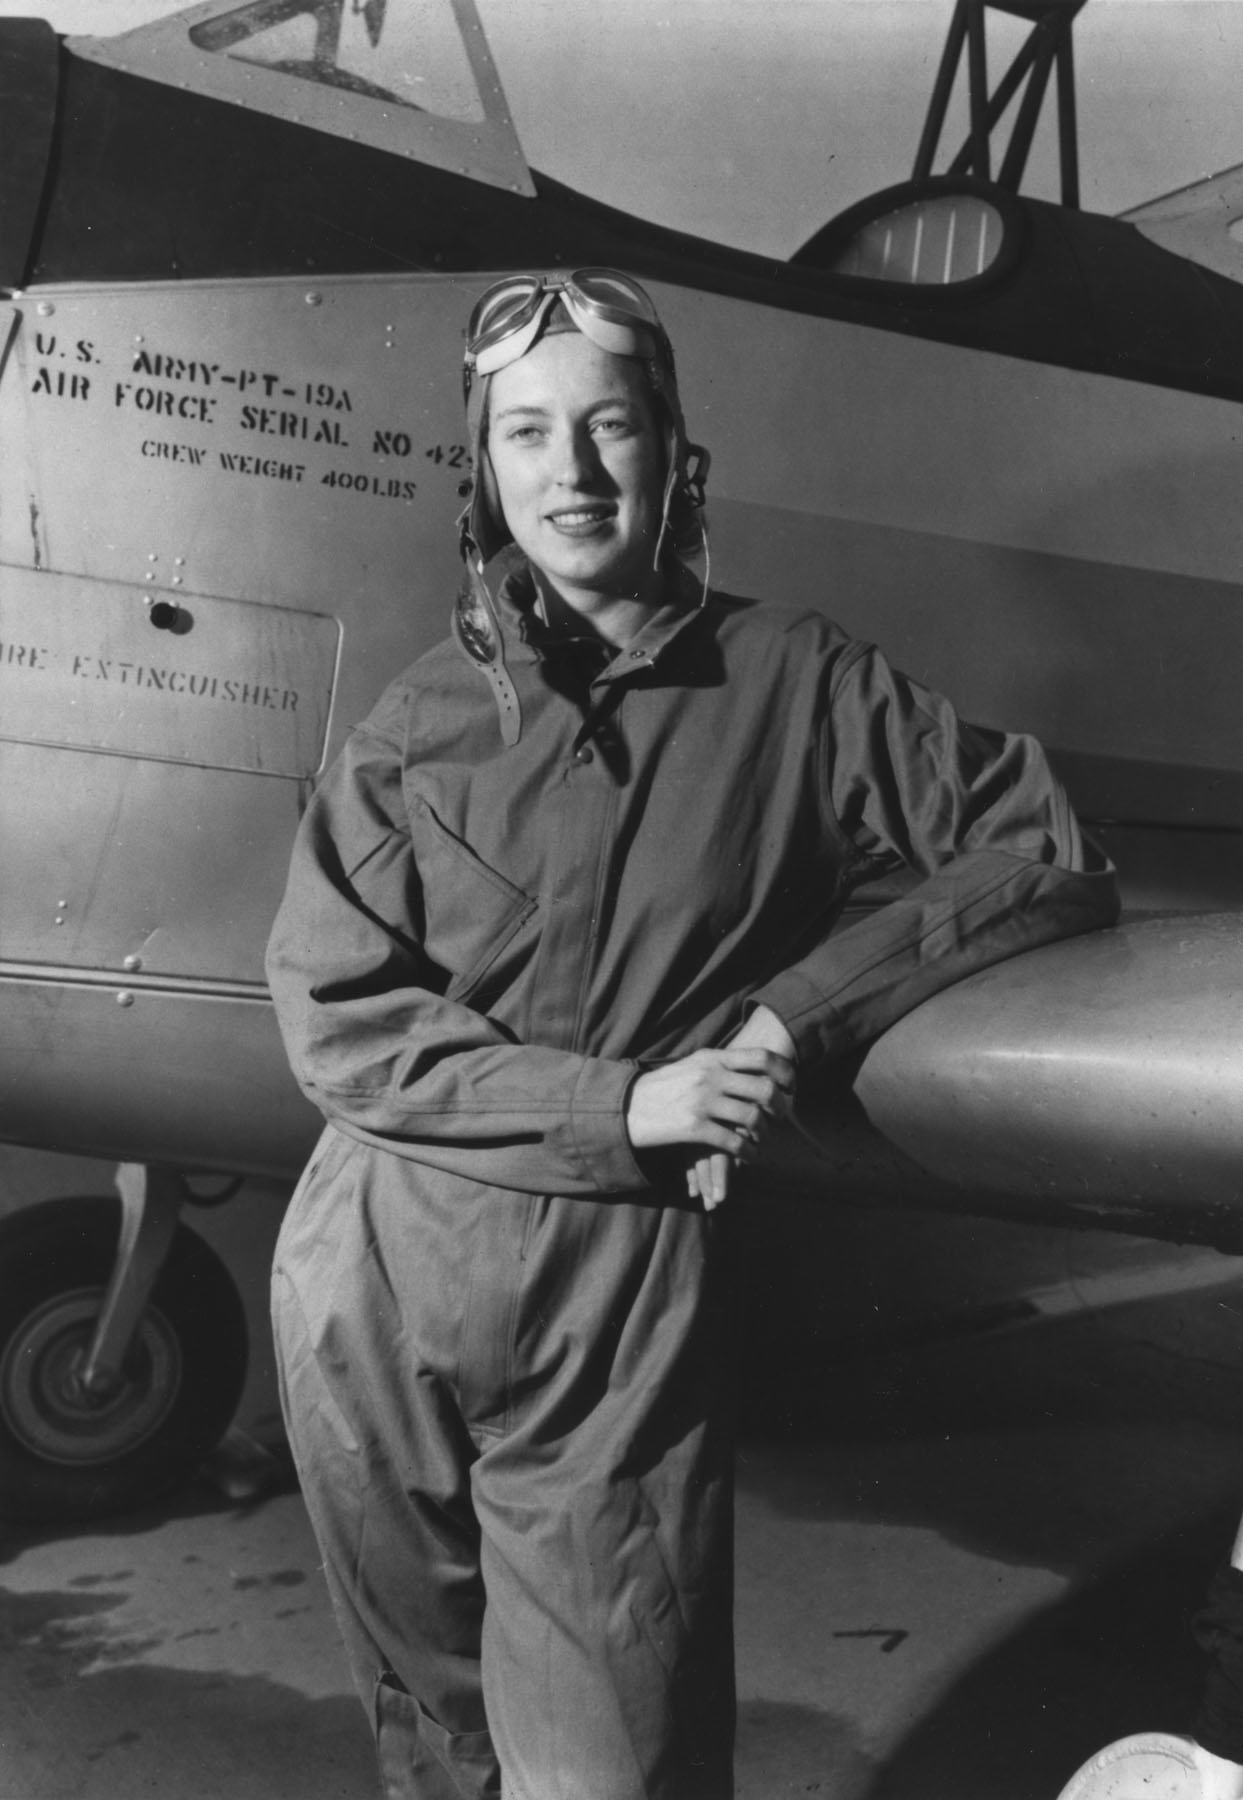 WASP Pilot Cornelia Fort with her PT-19A Plane